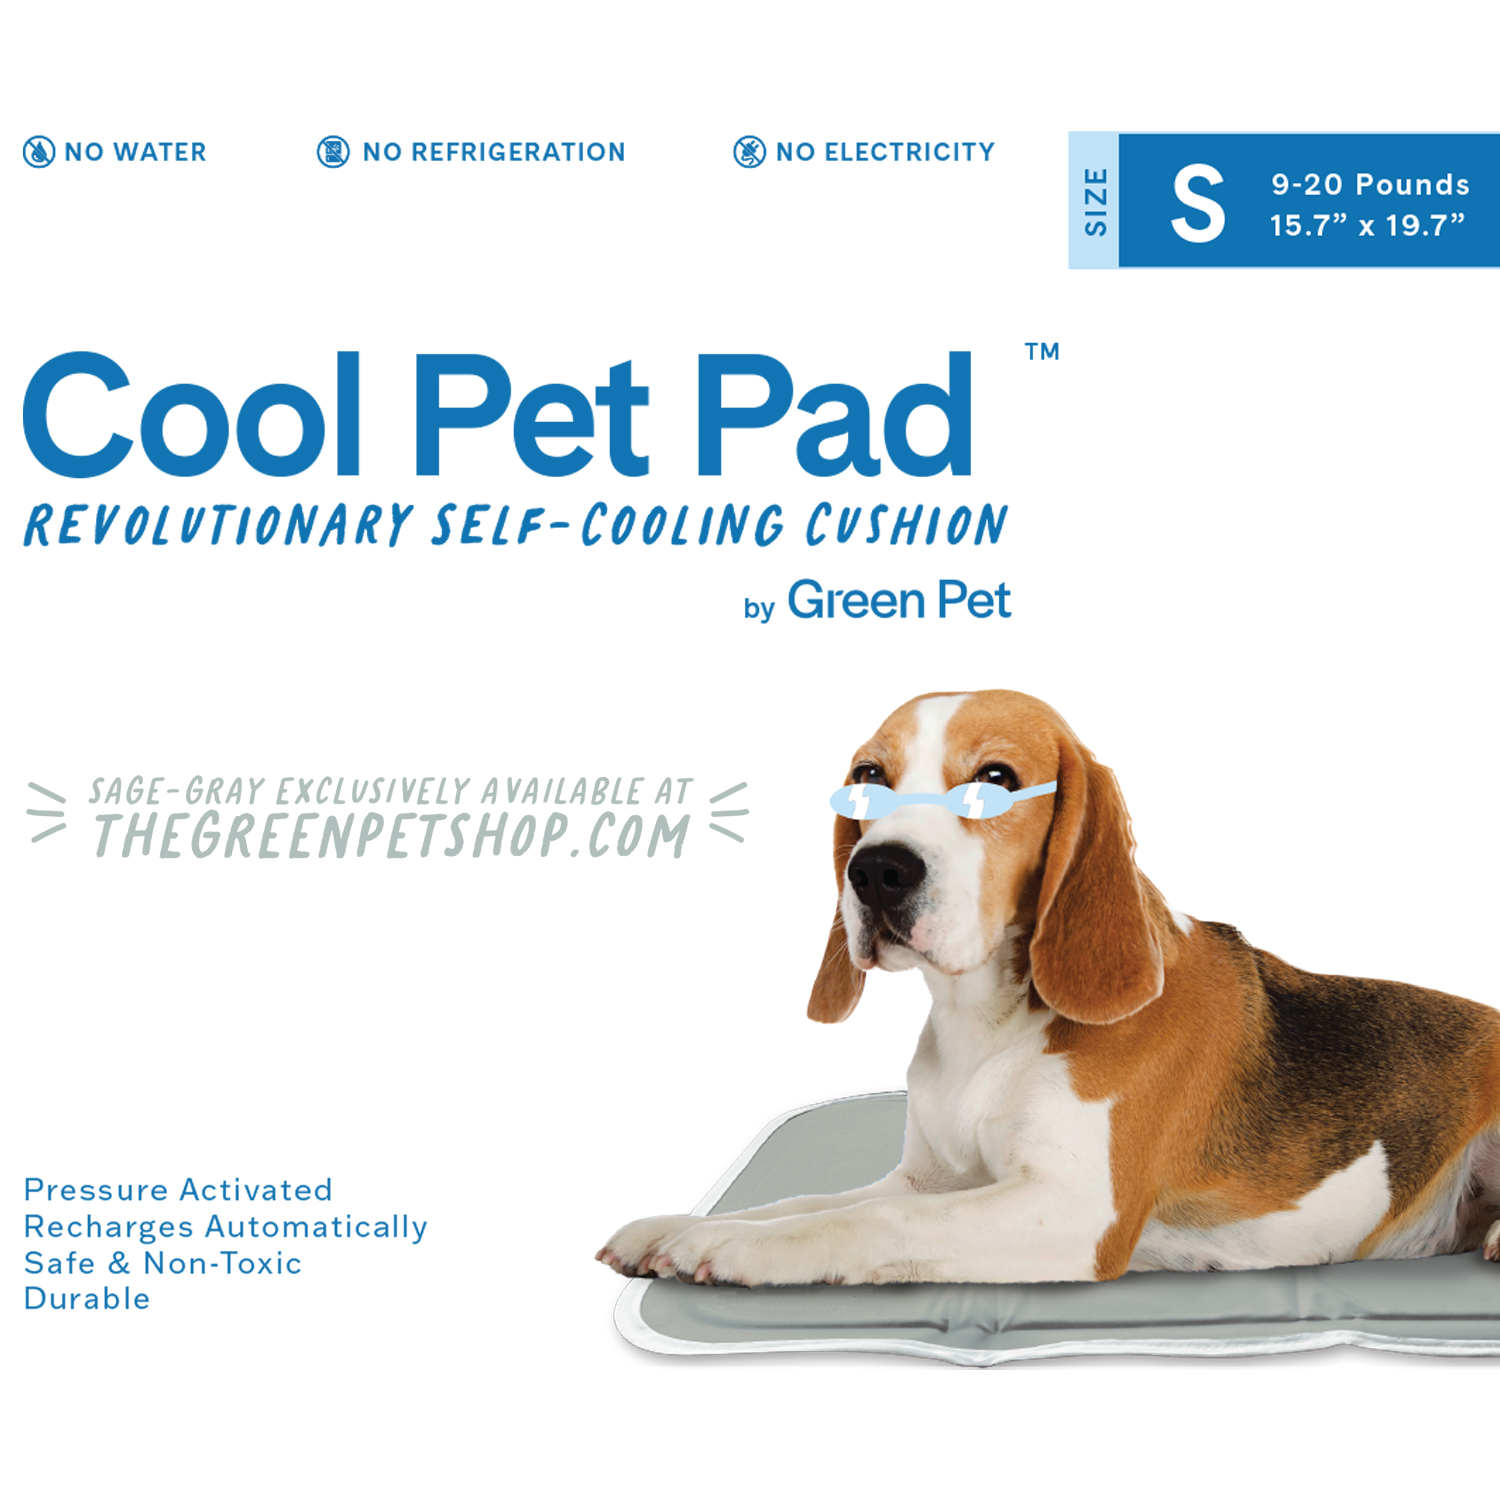 Chillz Dog Cooling Mat, Large - Pressure Activated Pet Cooling Mat for Dogs  - No Water or Refrigeration Needed - Non-Toxic Gel Cooling Pad, Ideal for